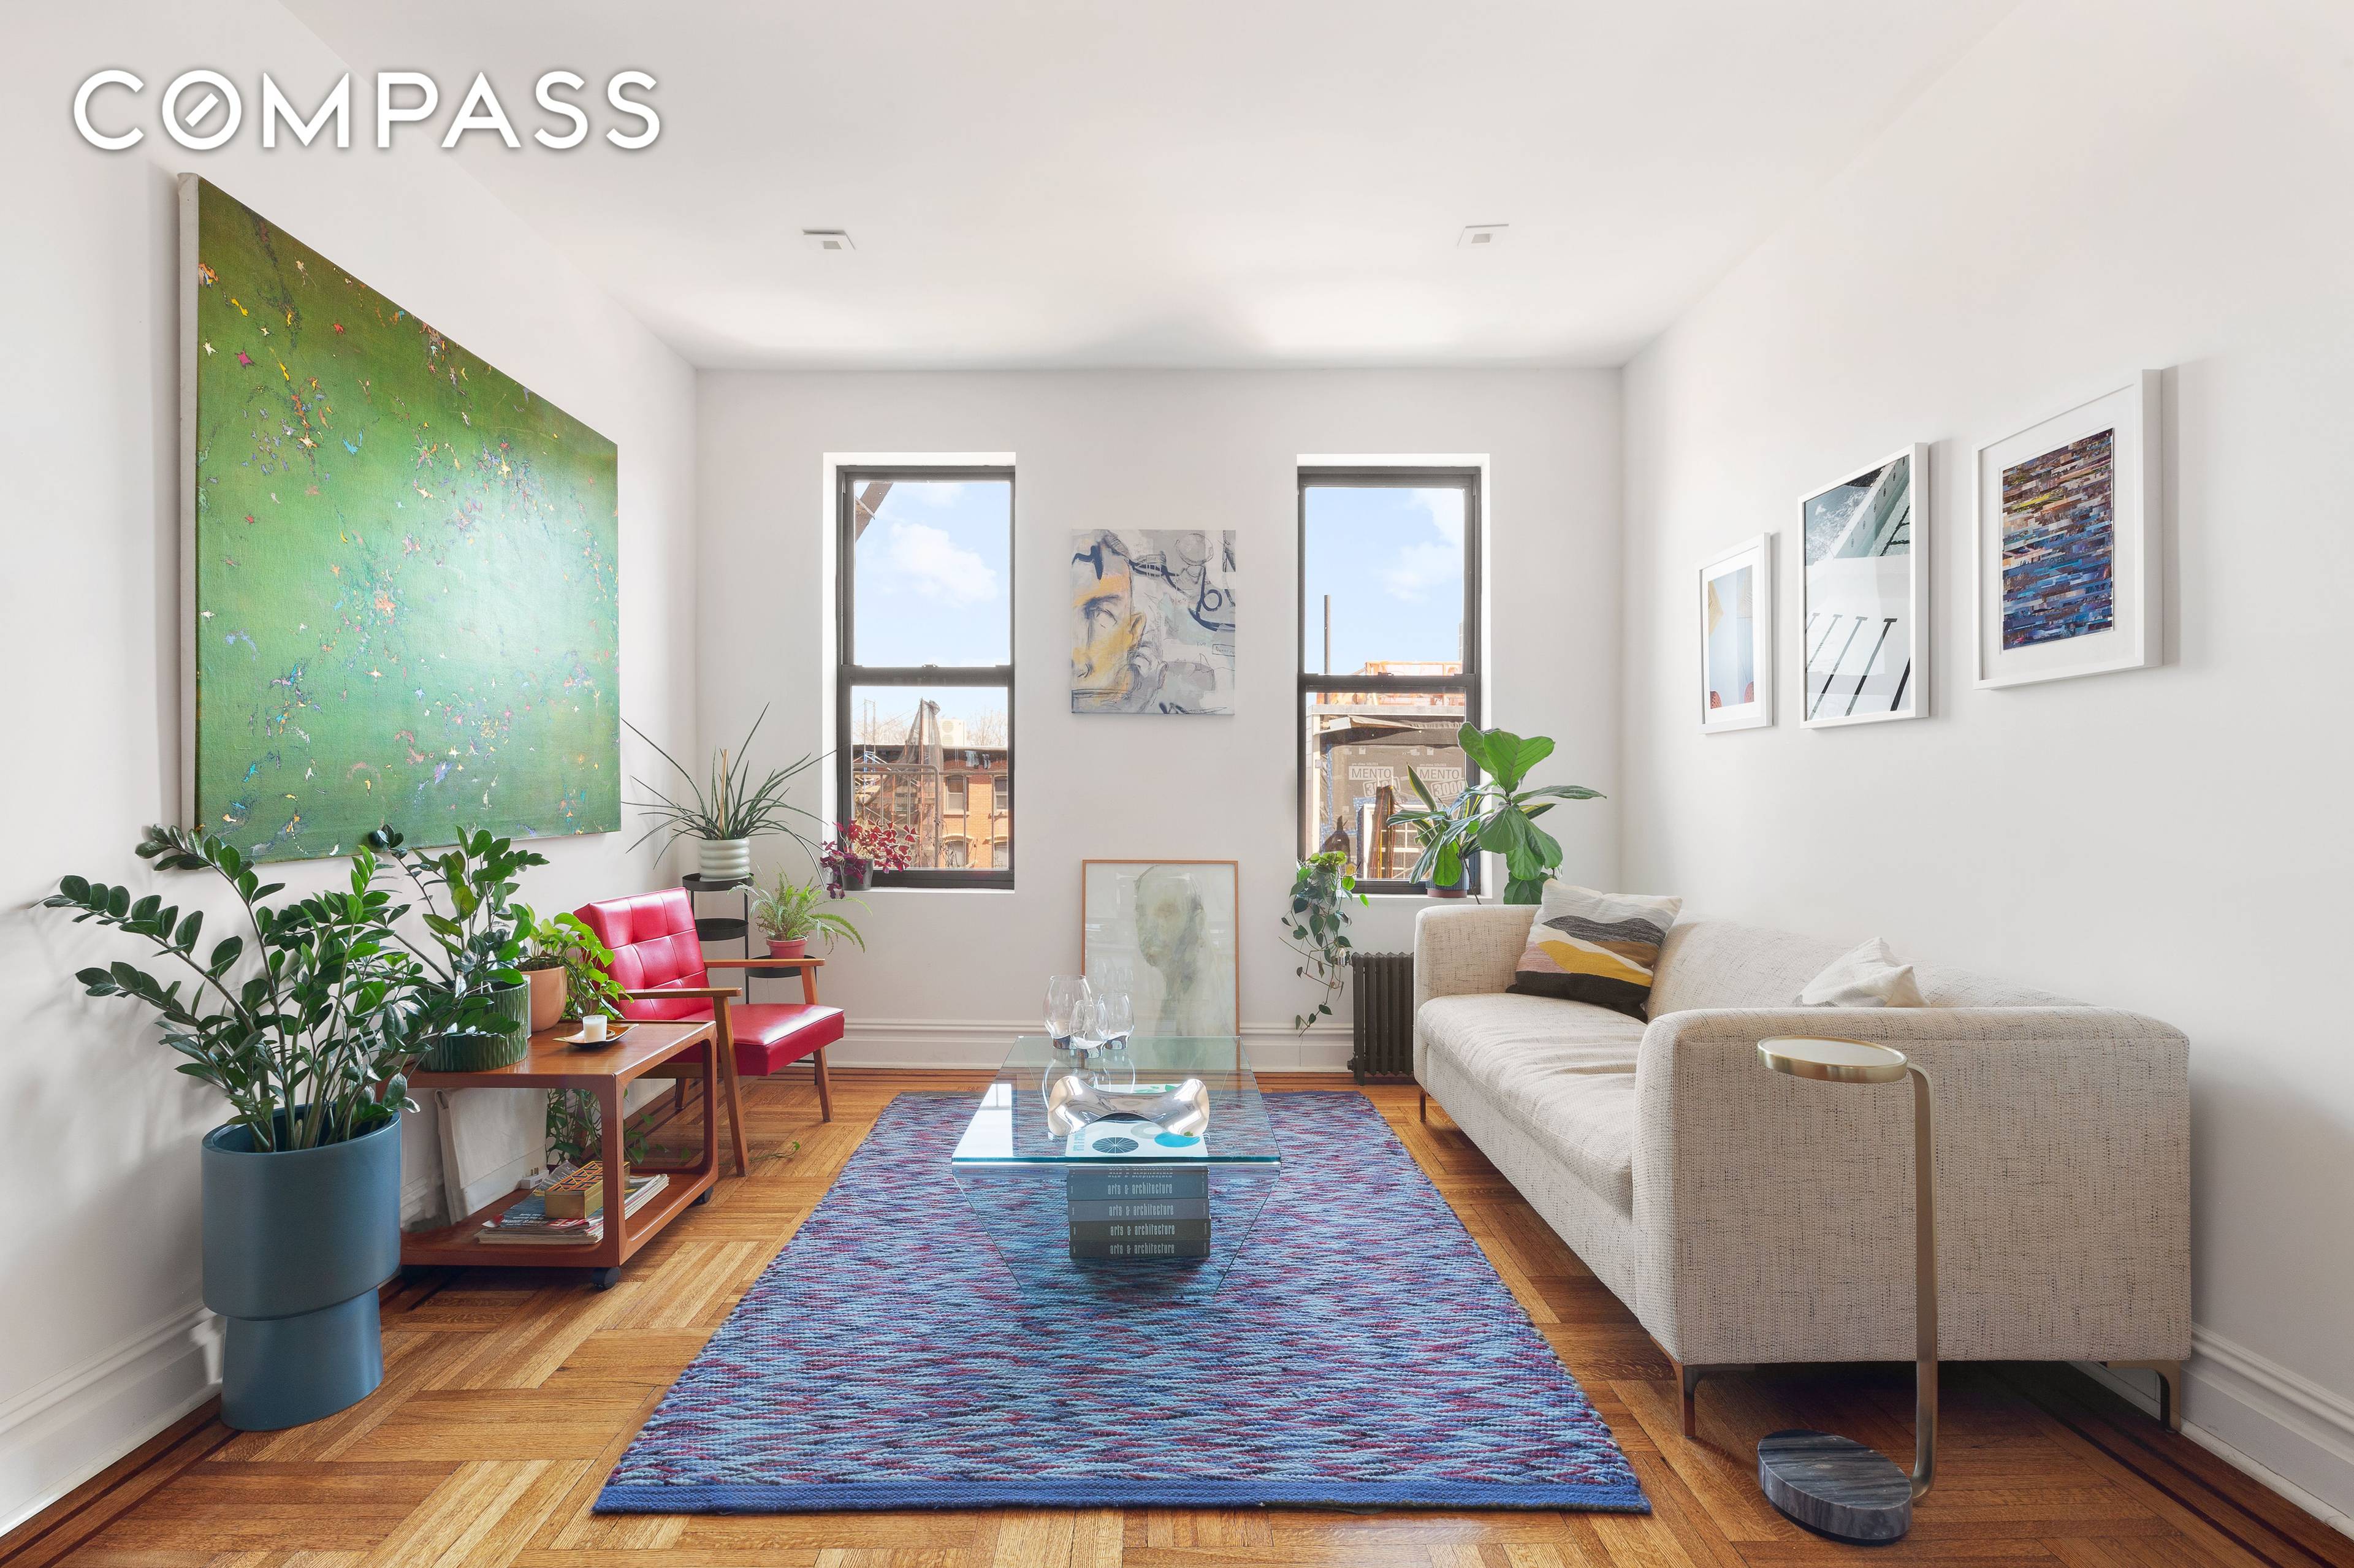 Welcome to 451 Clinton Avenue, a spacious and stylish coop in historic Clinton Hill.